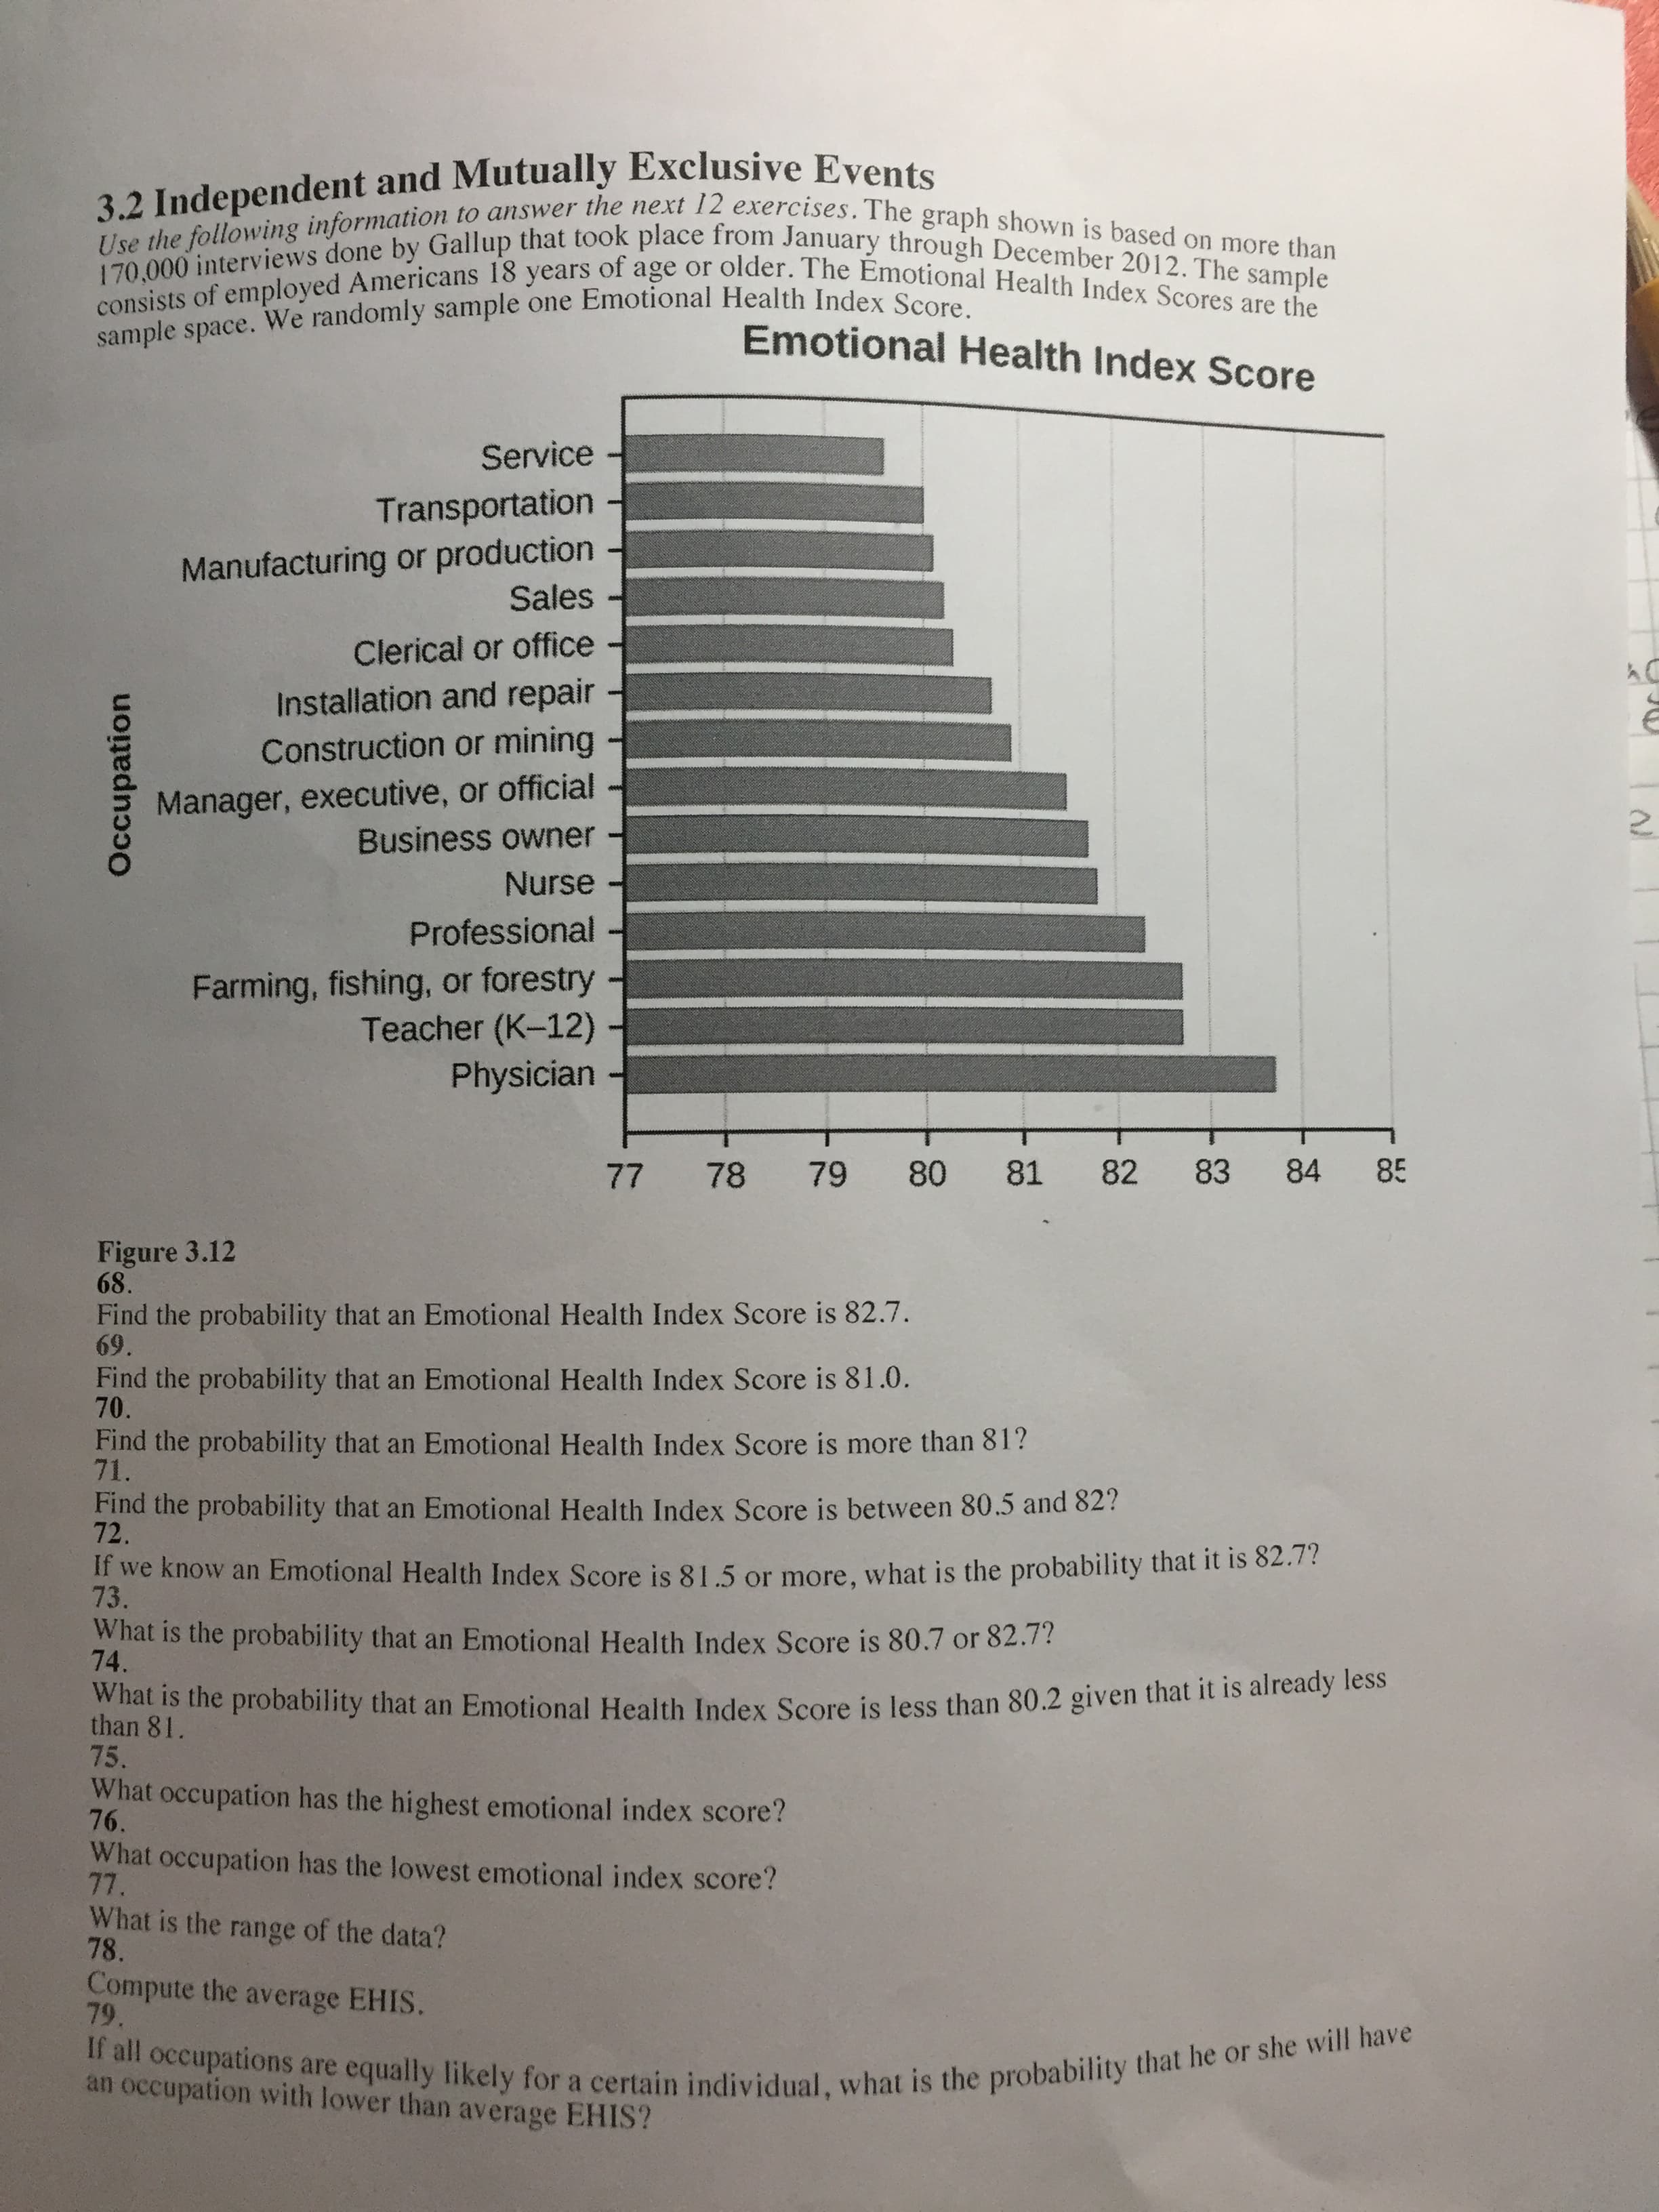 71.
Find the probability that an Emotional Health Index Score is between 80.5 and 82?
72.
If we know an Emotional Health Index Score is 81.5 or more, what is the probability that it is 82.7?
73.
What is the probability that an Emotional Health Index Score is 80.7 or 82.7?
74.
than 8he probability that an Emotional Health Index Score is less than 80.2 given that it is already less
than 81.
